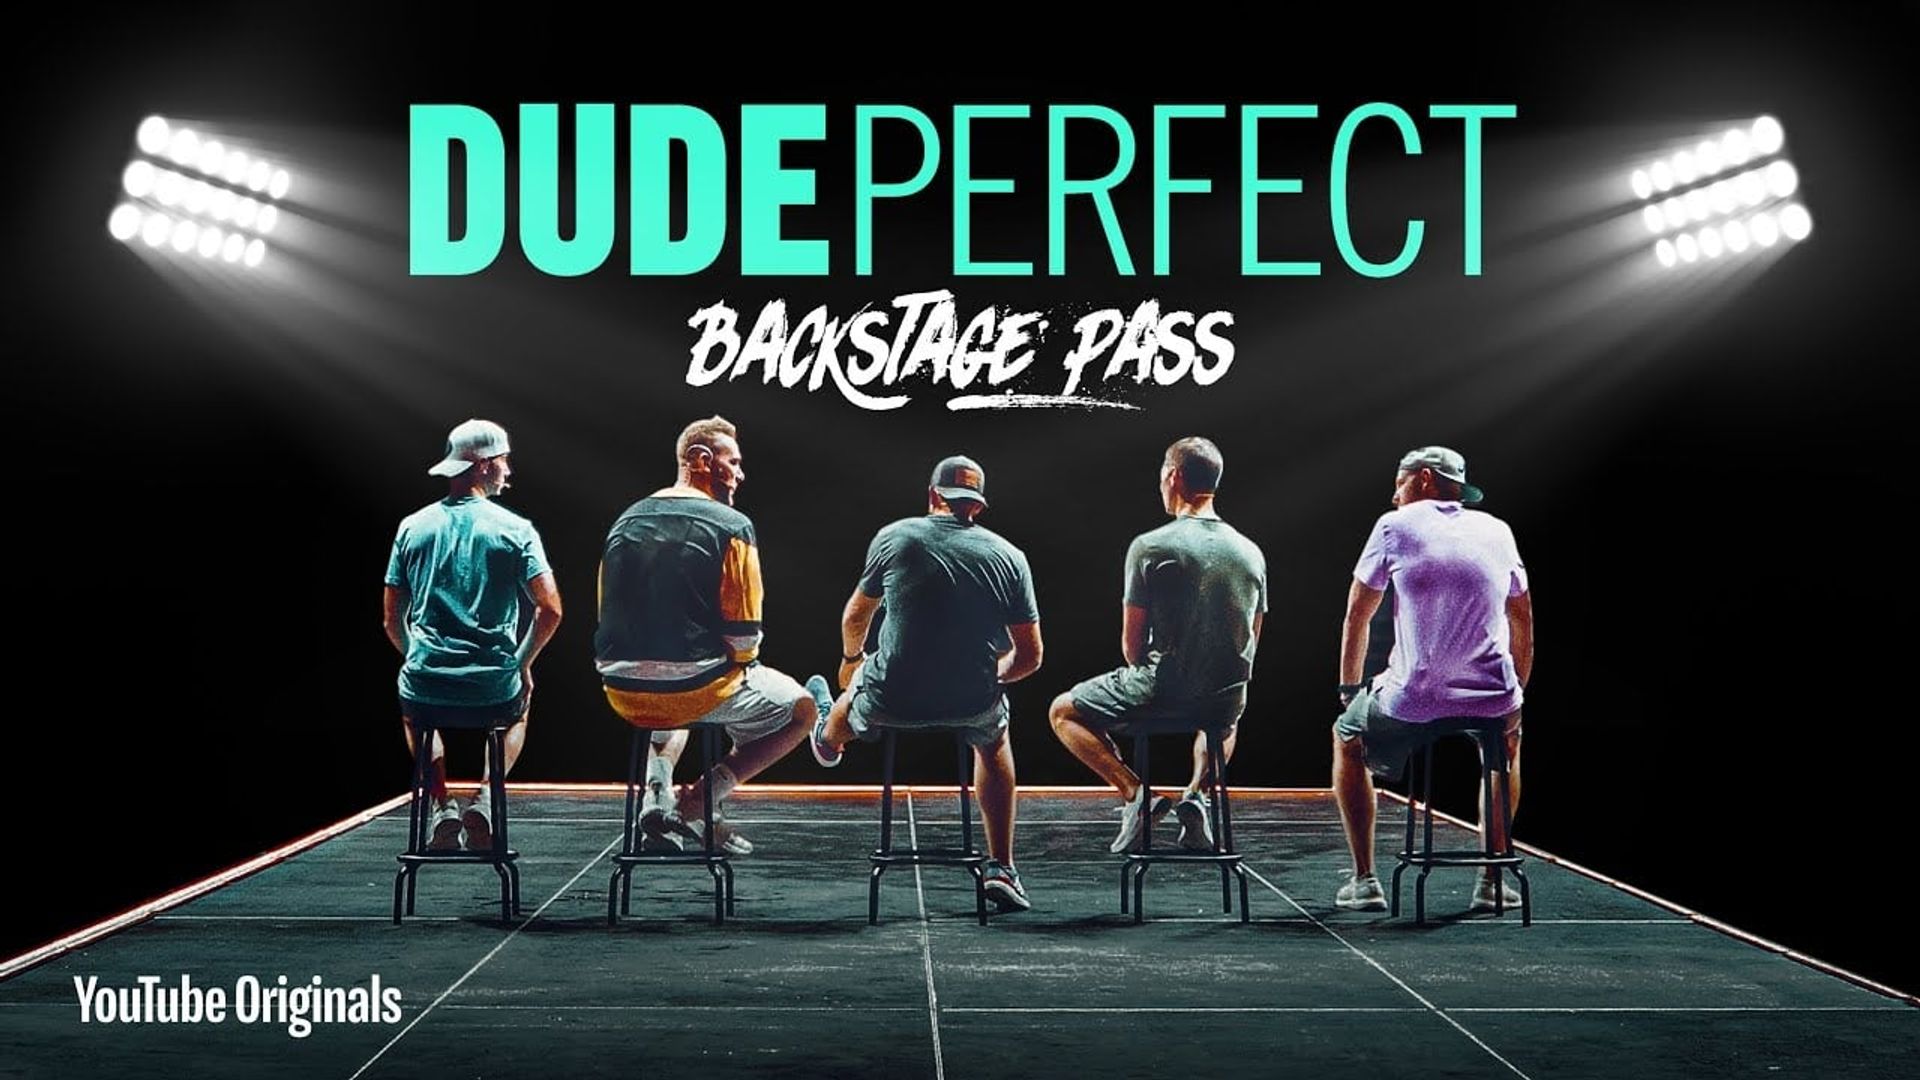 Dude Perfect: Backstage Pass background